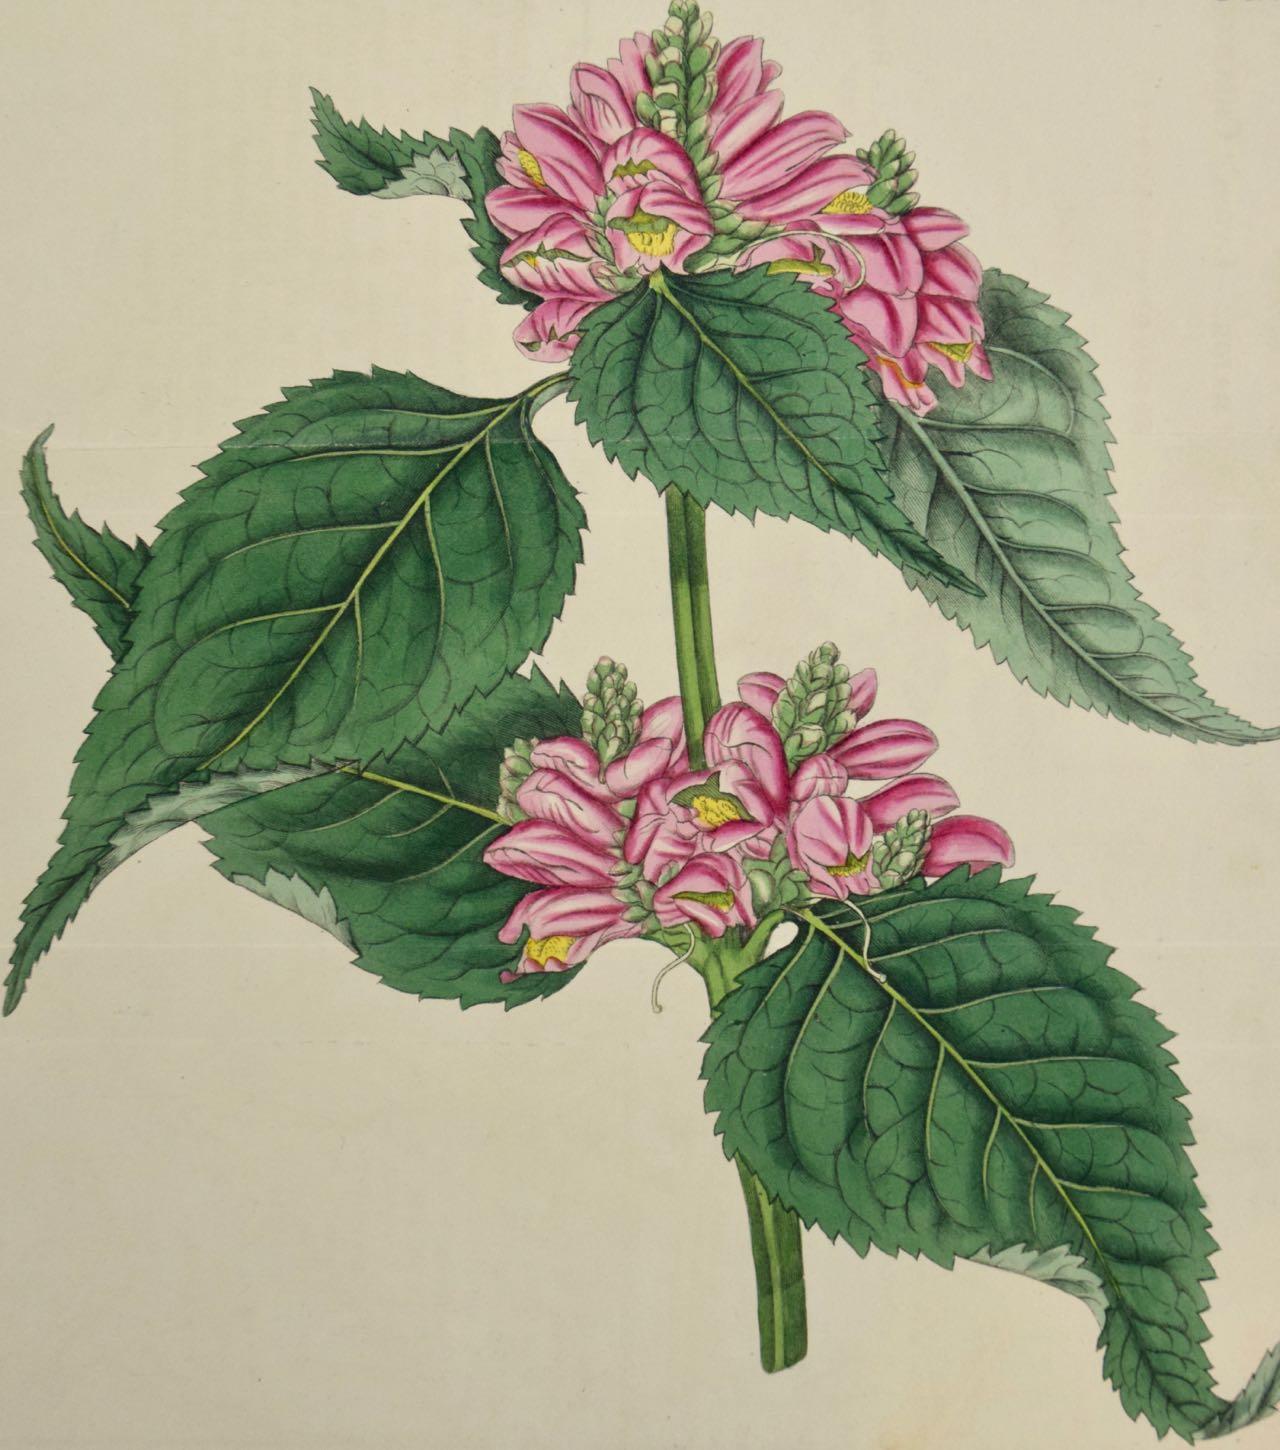 Flowering Lyons' Chelone Botanical: A 19th C. Hand-colored Engraving by Curtis - Print by William Curtis